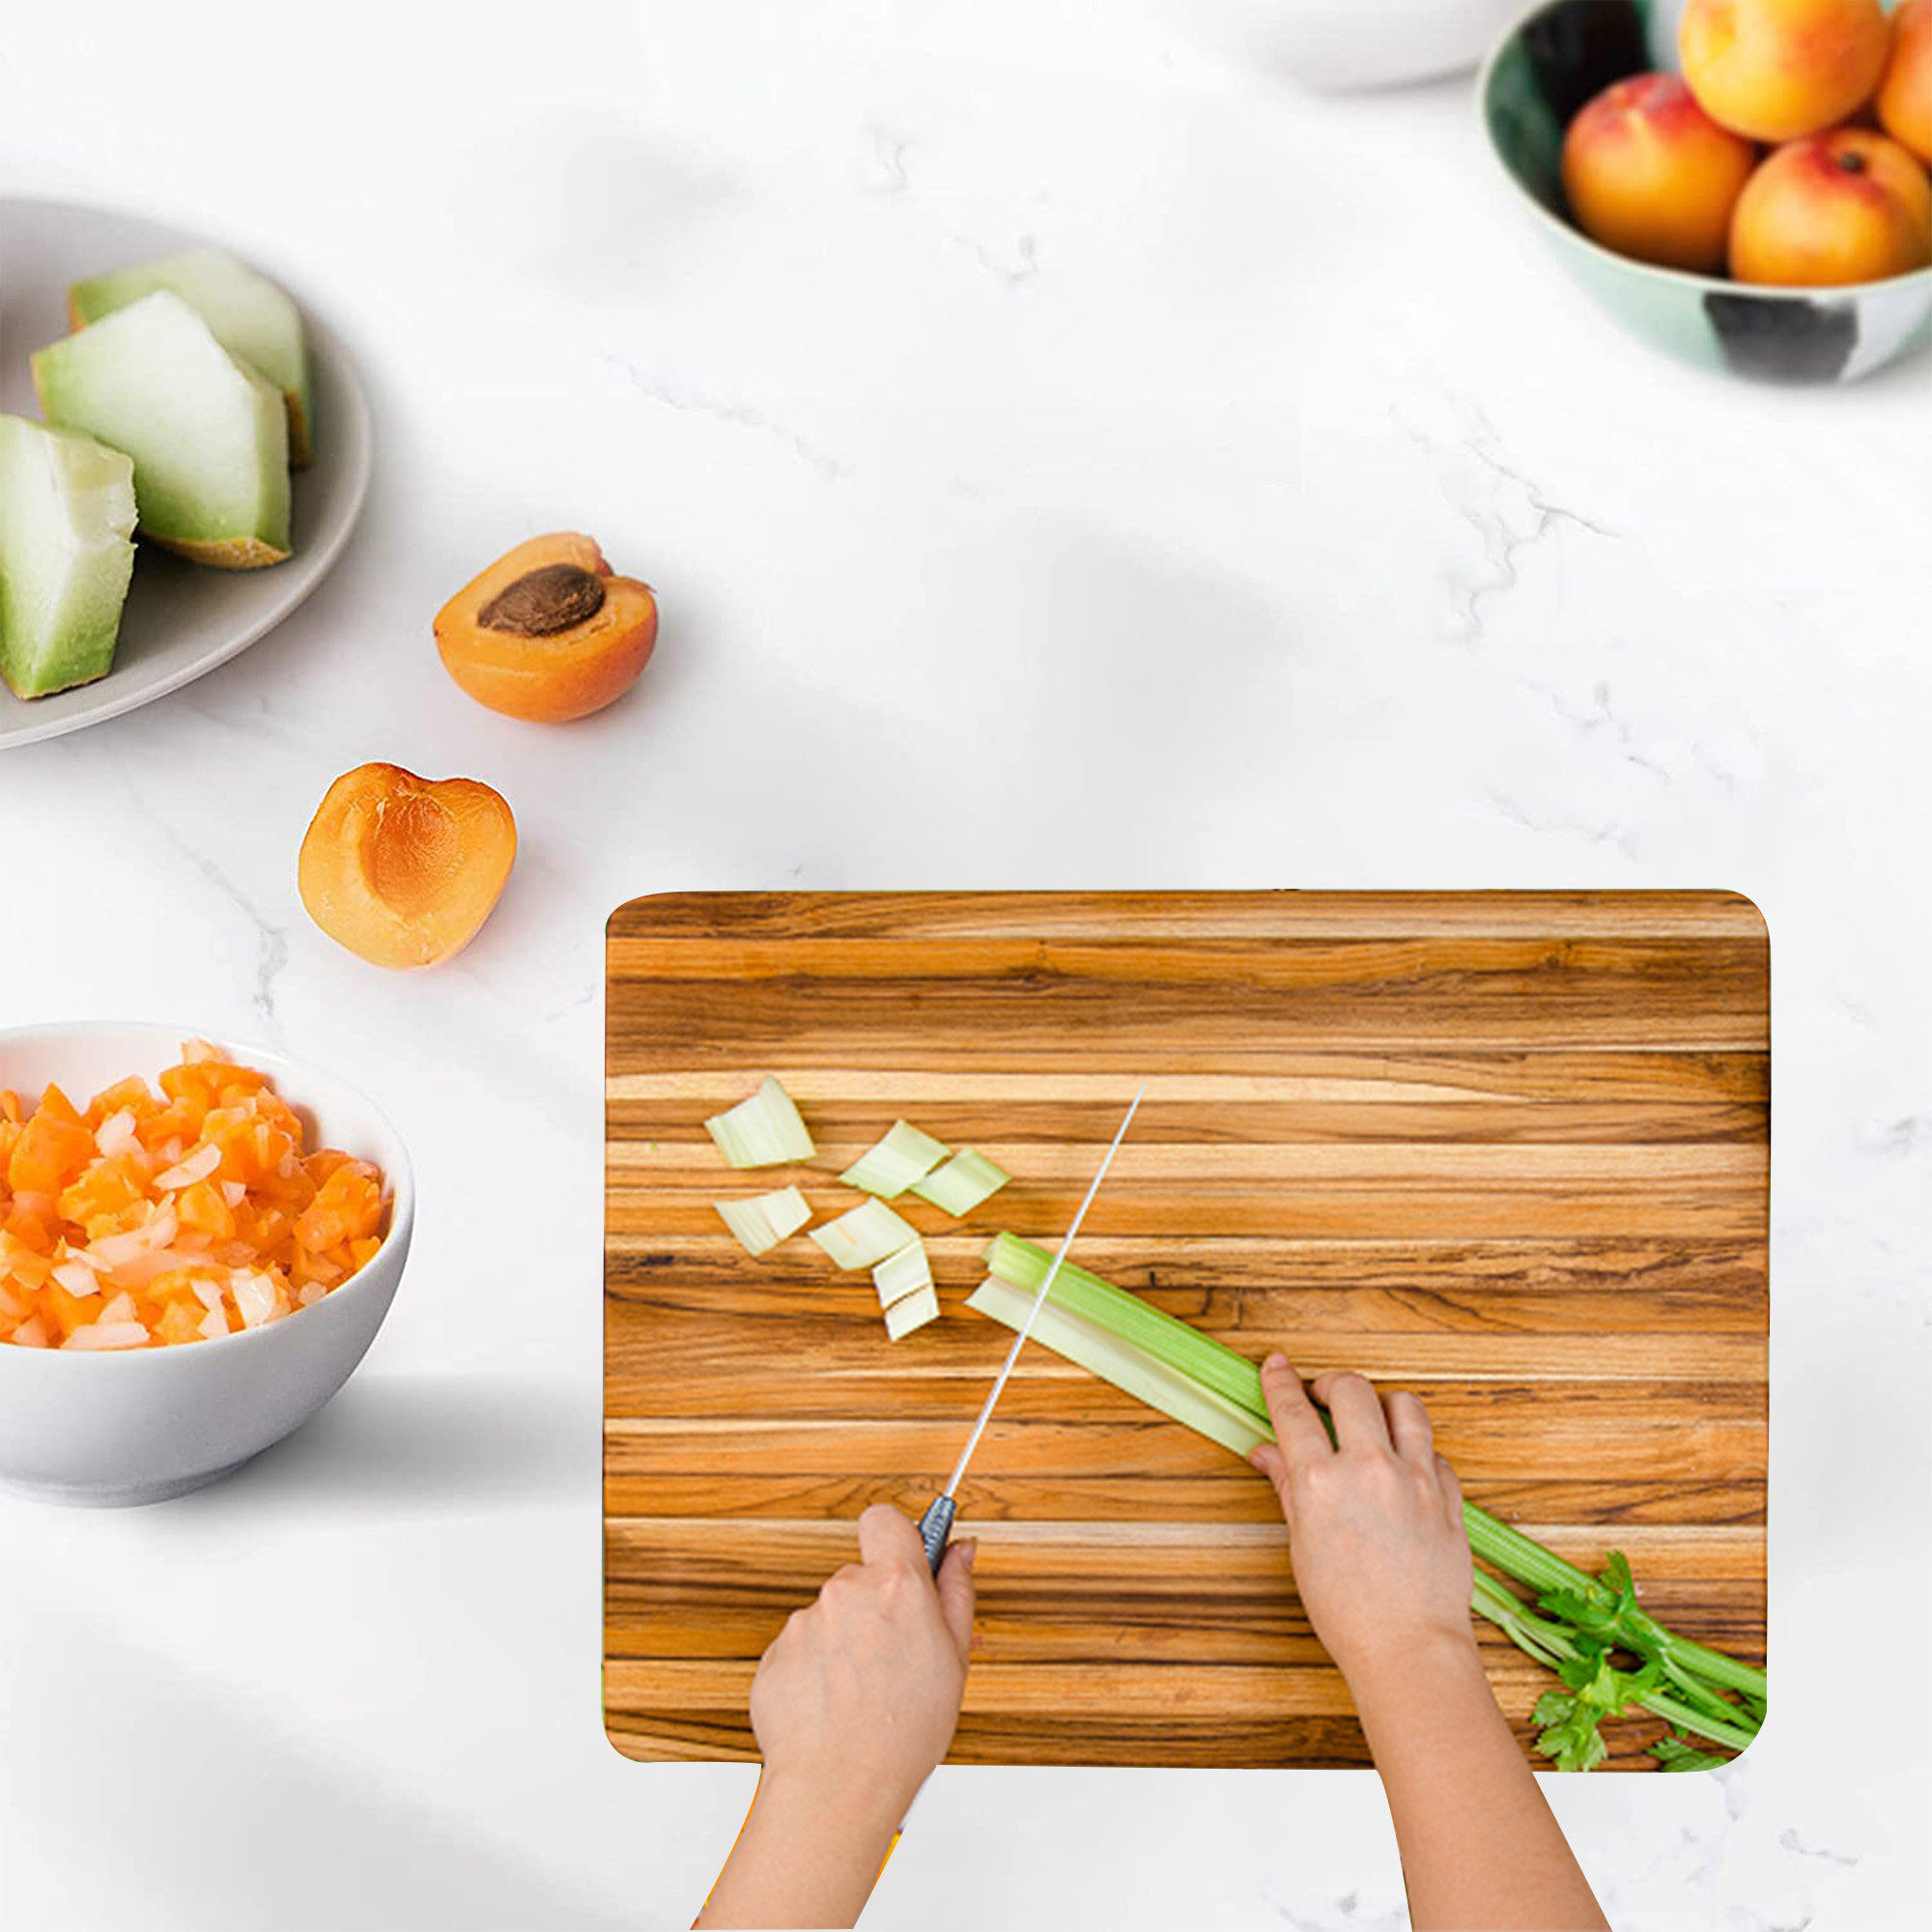 Wood Cutting Board - Wooden Kitchen Chopping Boards for Meat, Cheese,  Bread, Vegetables &Fruits,Knife Friendly Kitchen Butcher Block 